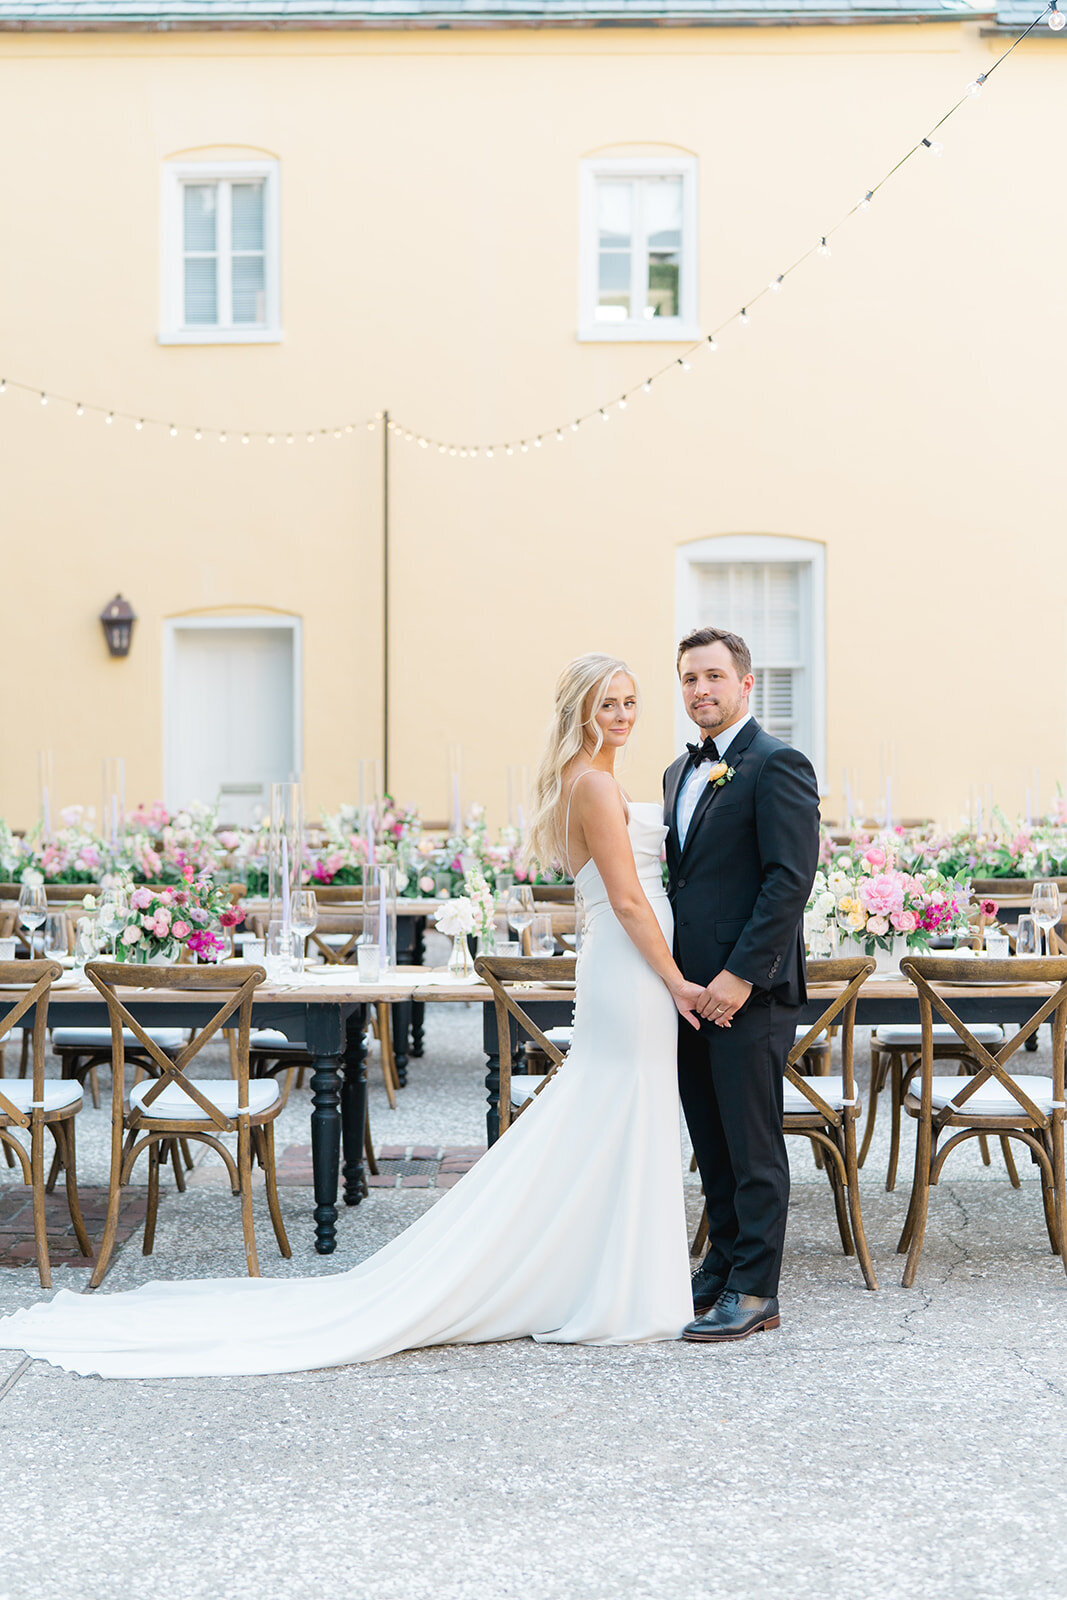 Perfect lighting wedding day portraits at open air wedding reception. Yellow walls at William Aiken House.